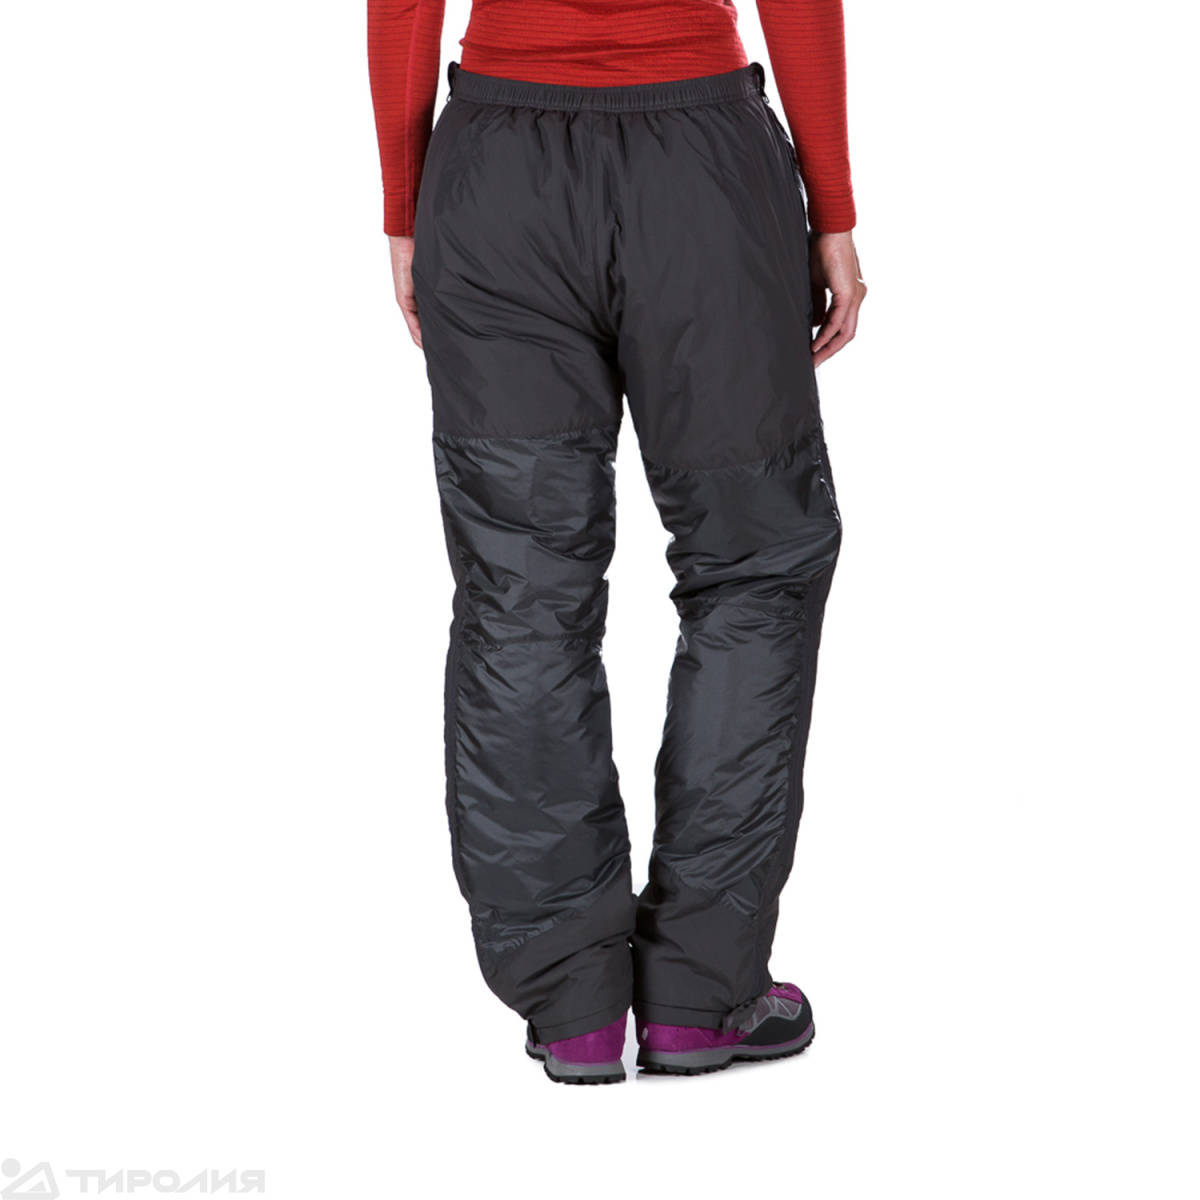 Брюки женские Montbell: Tec Thermawrap Pants Women's